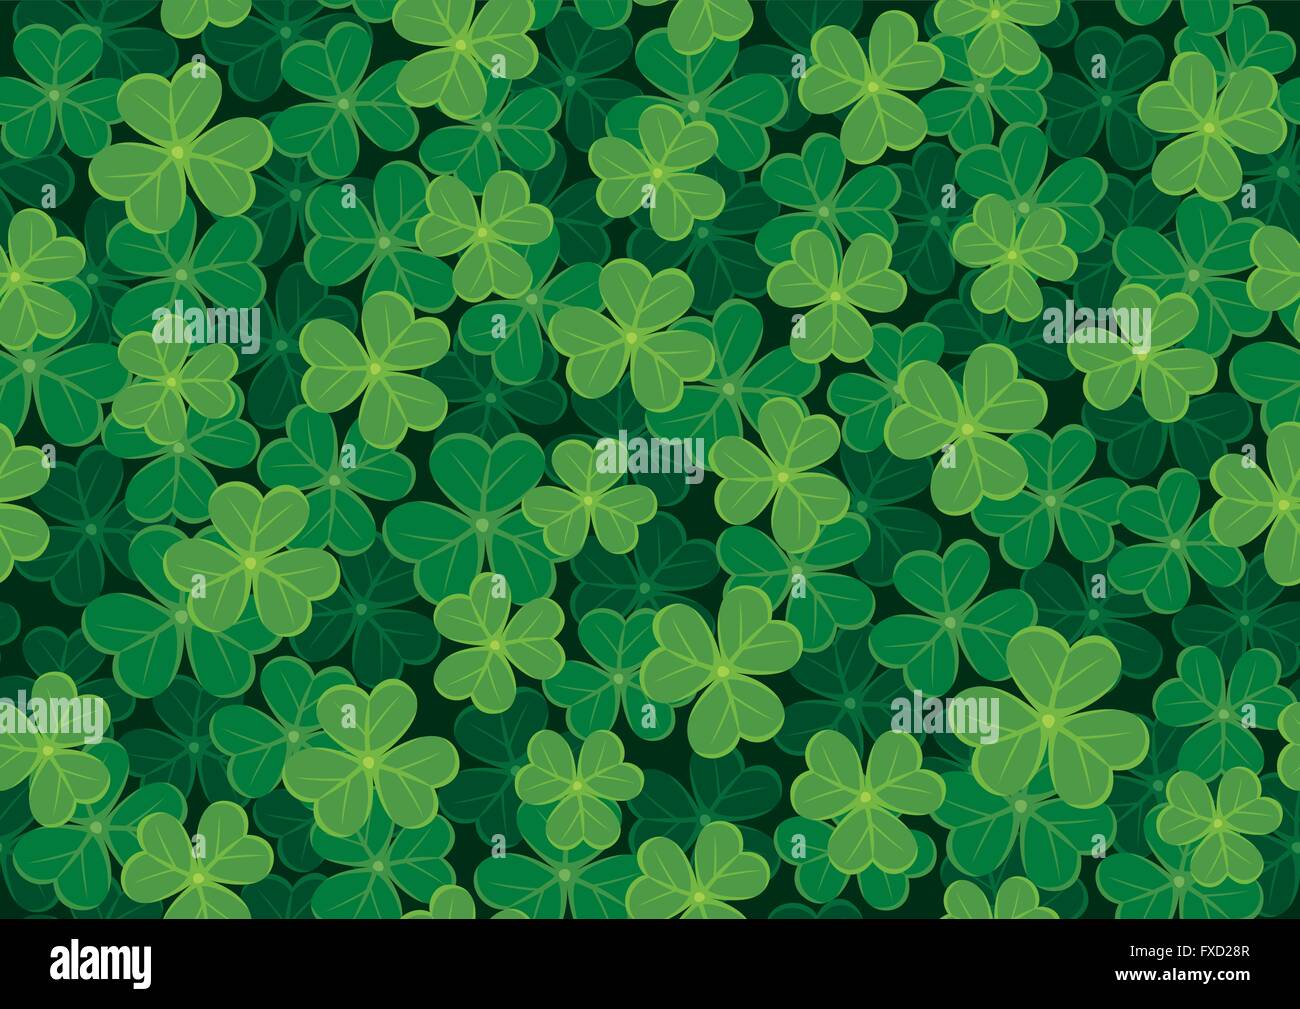 Seamless clover tile. Place them together to create larger background. Stock Vector